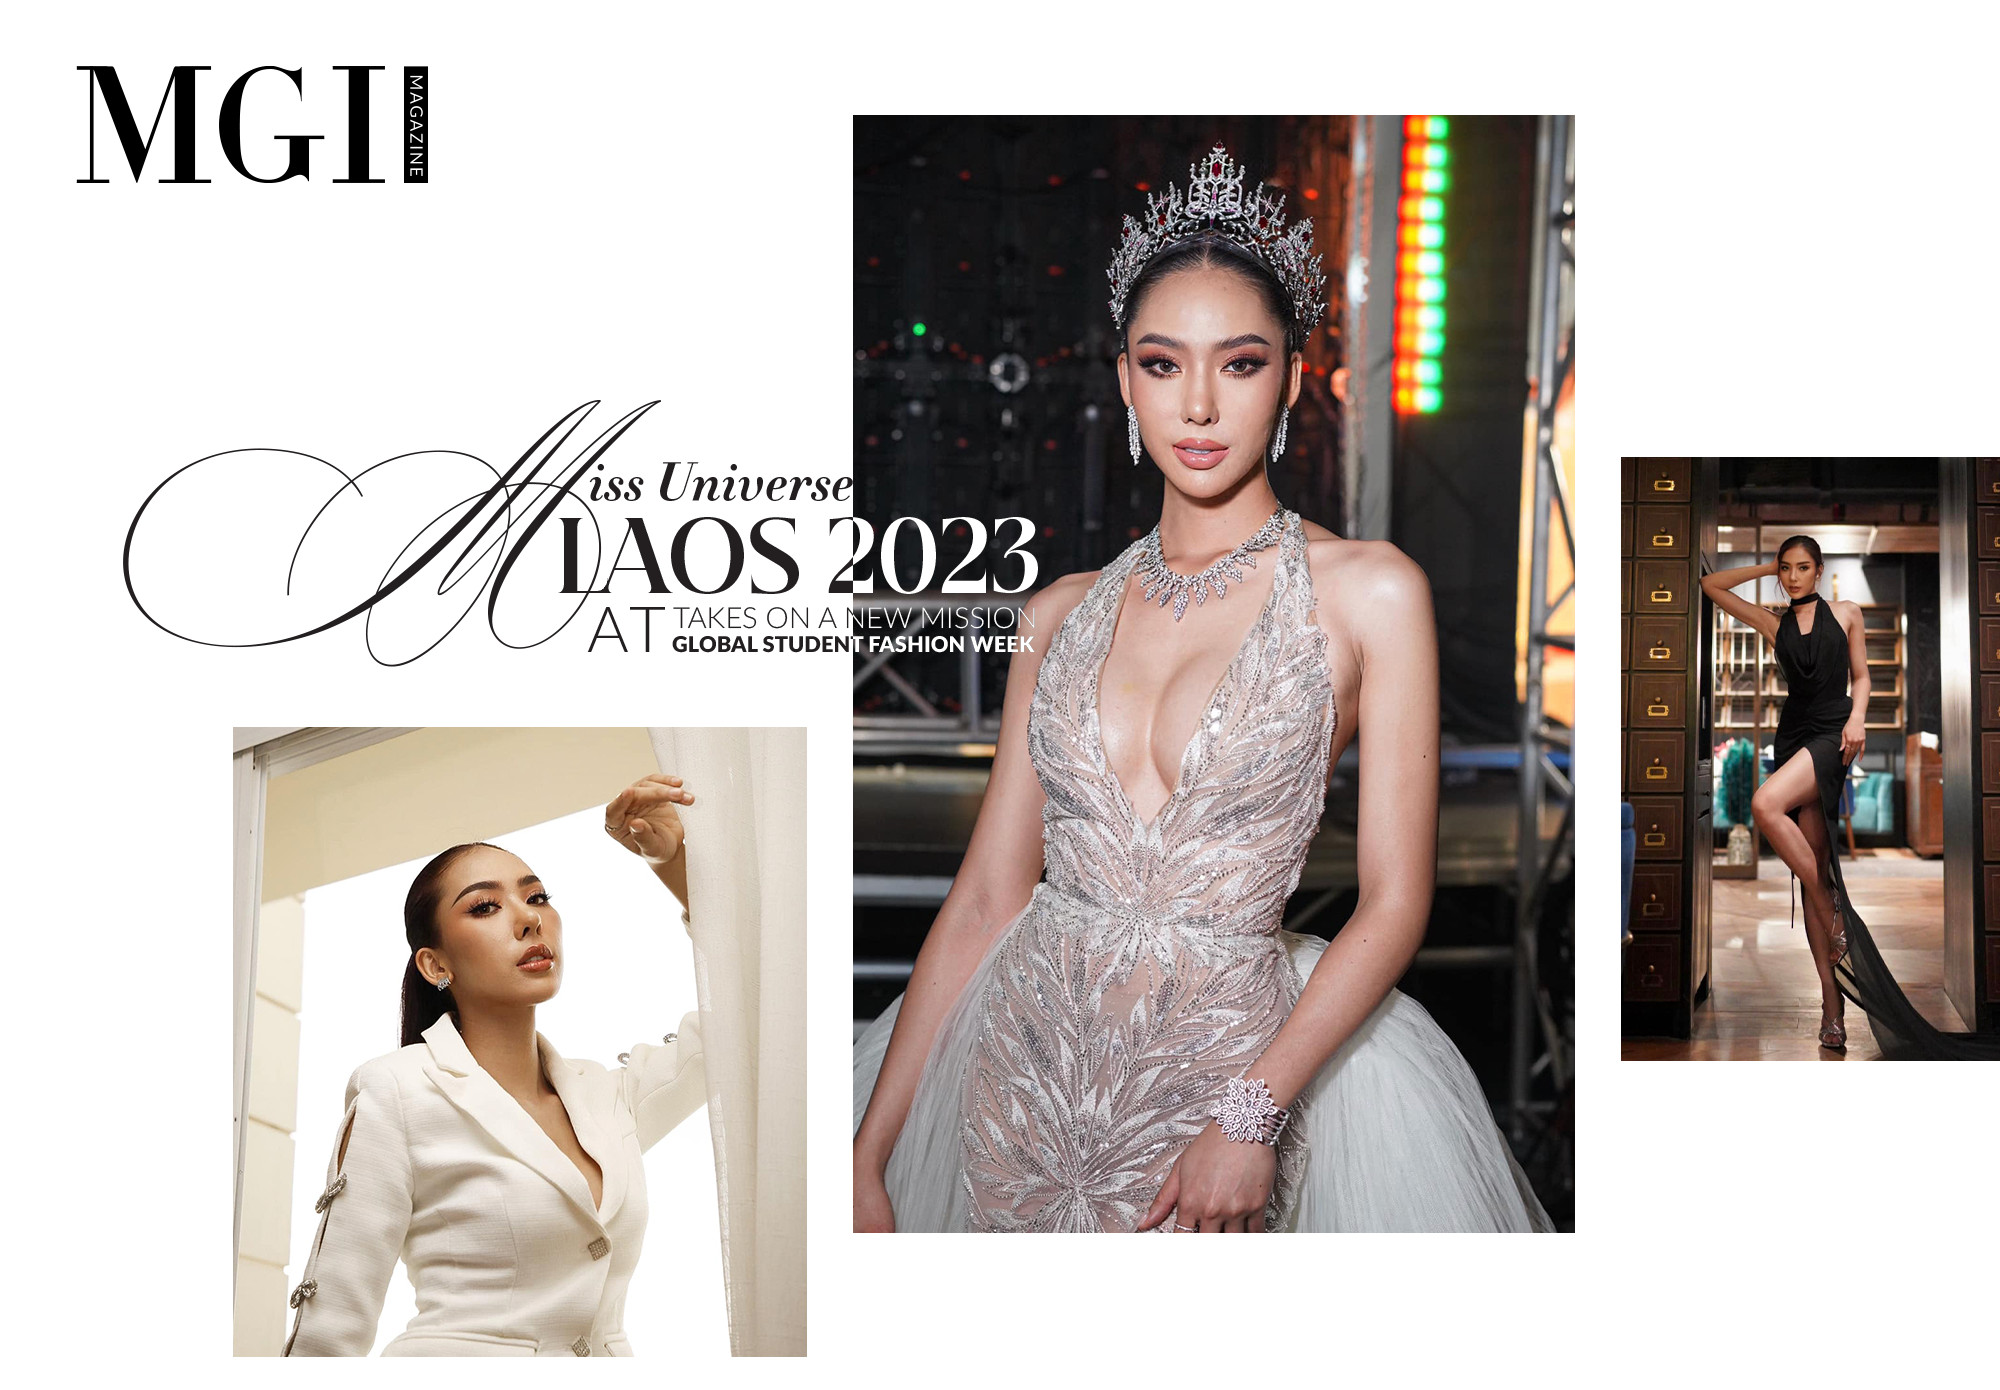 Miss Universe Laos 2023 takes on a new mission at Global Student Fashion Week